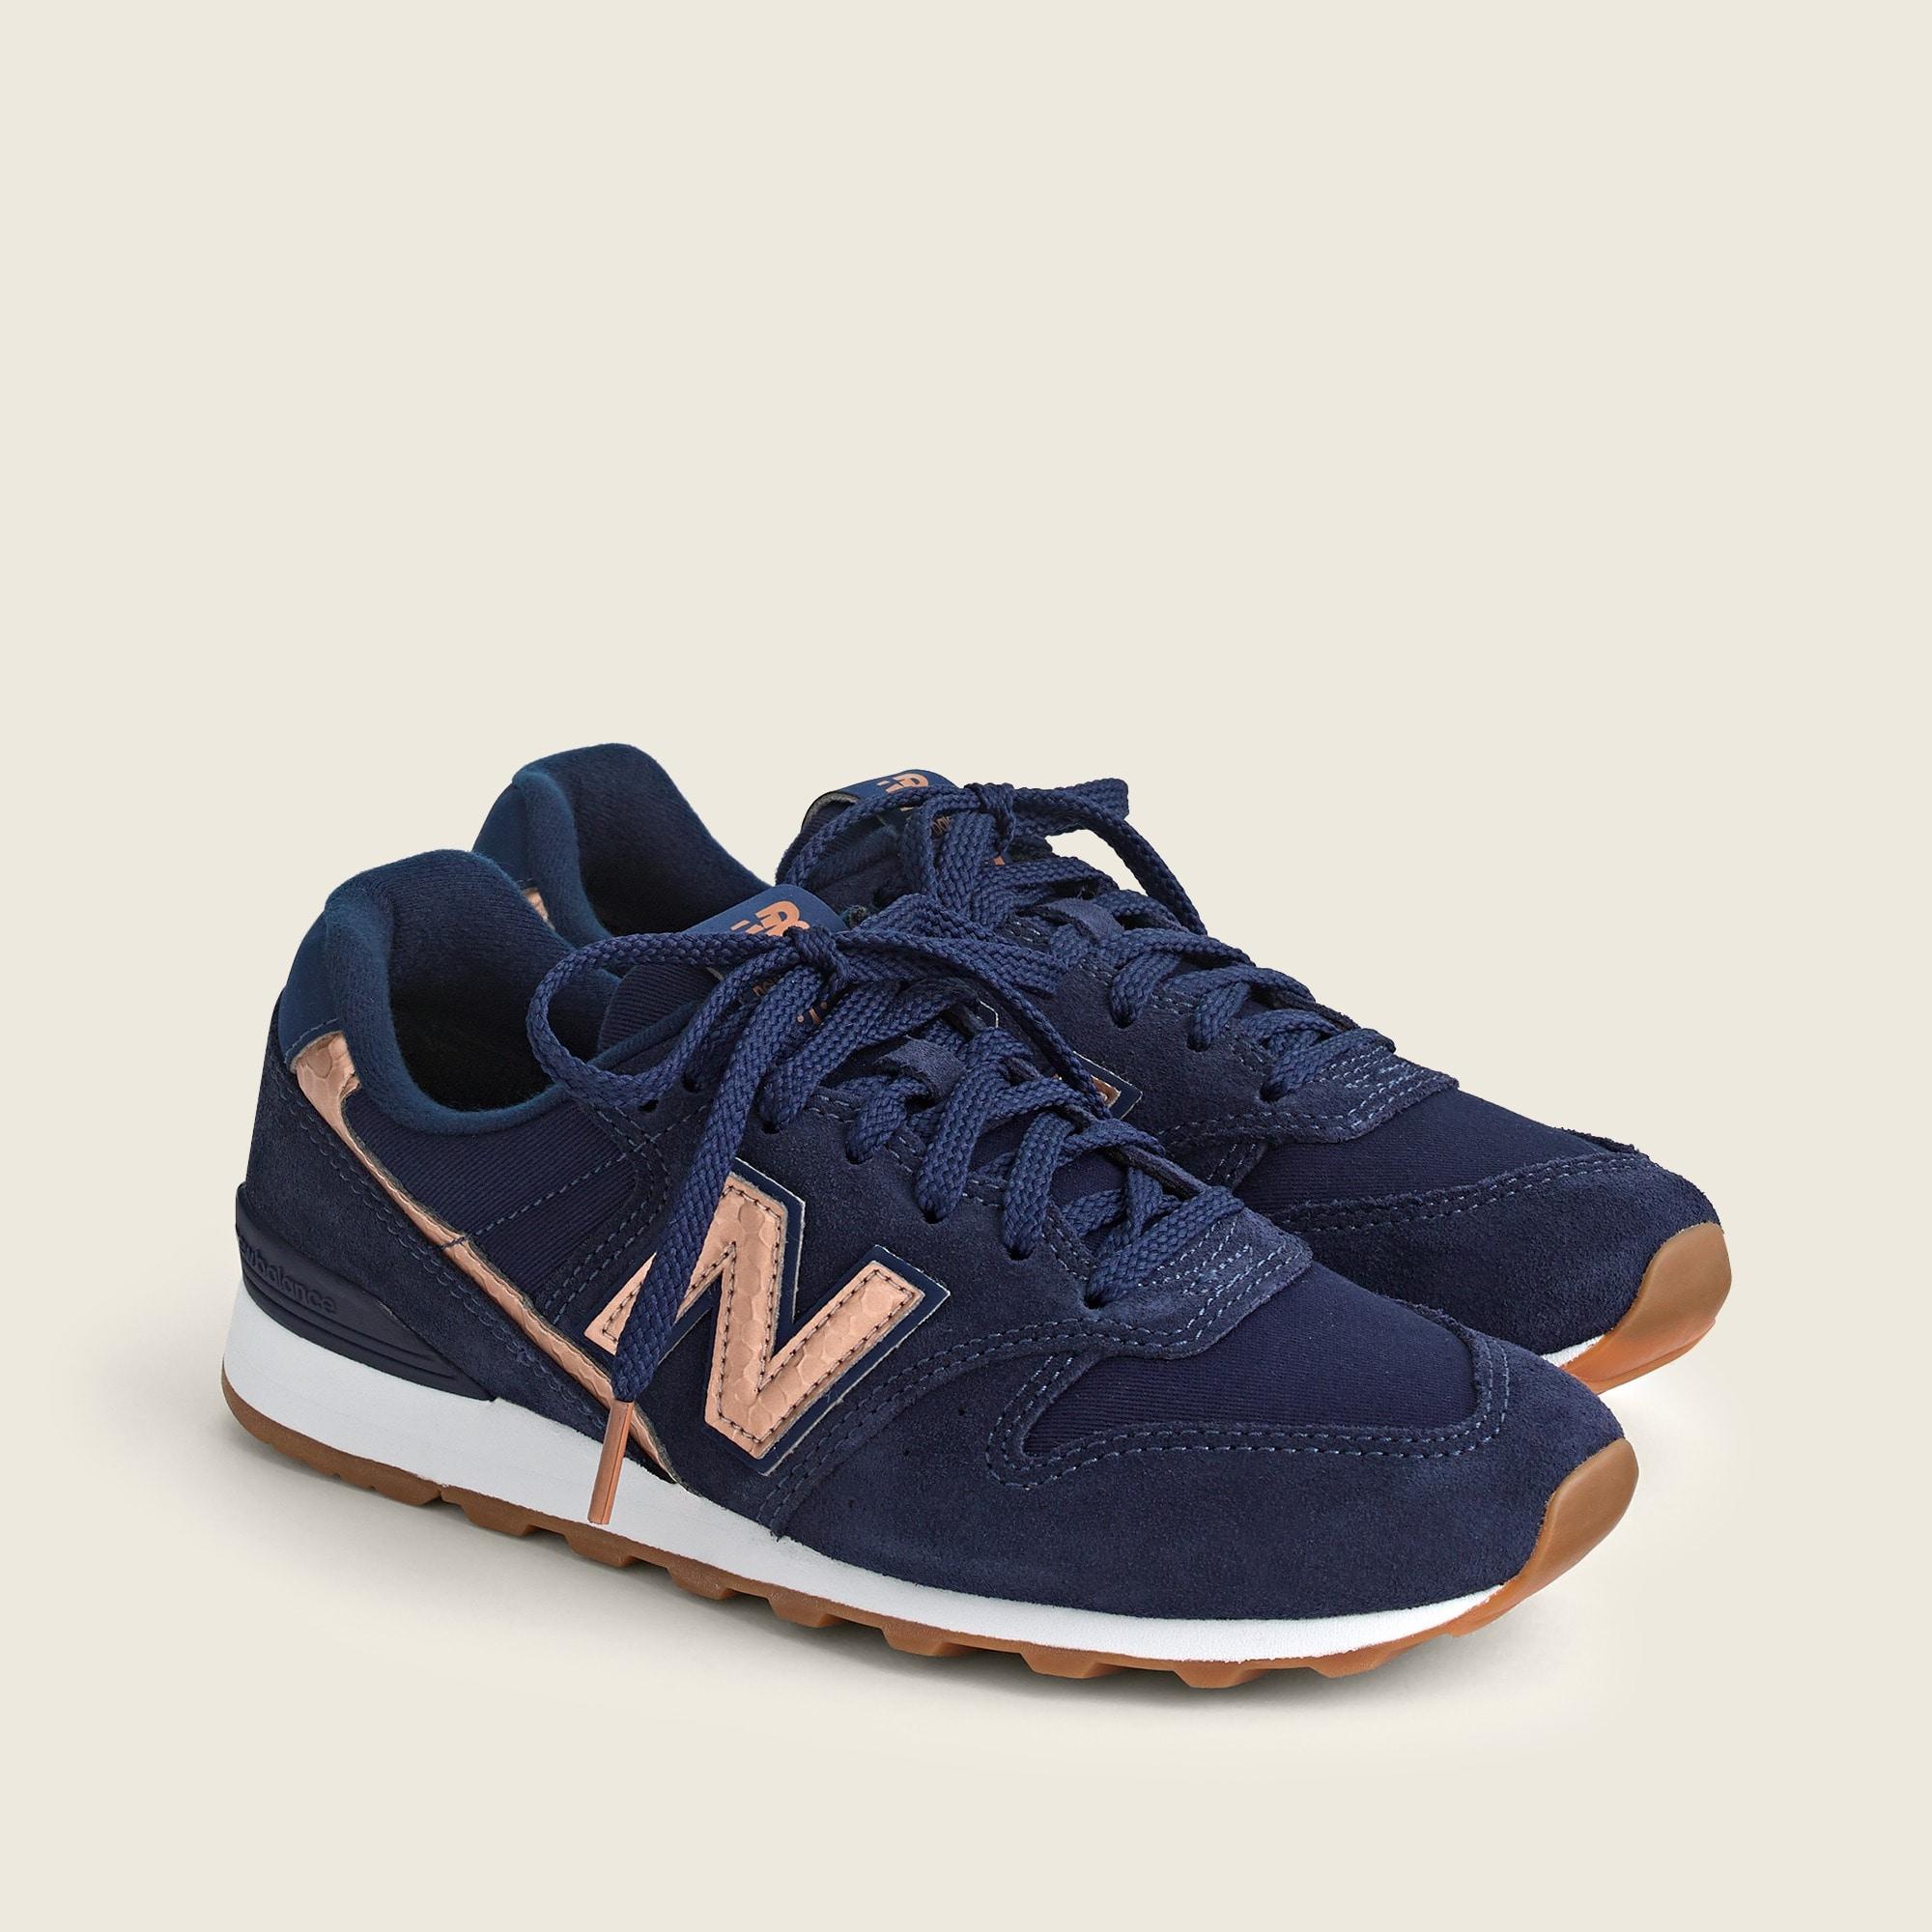 New Balance ® Sneakers in |